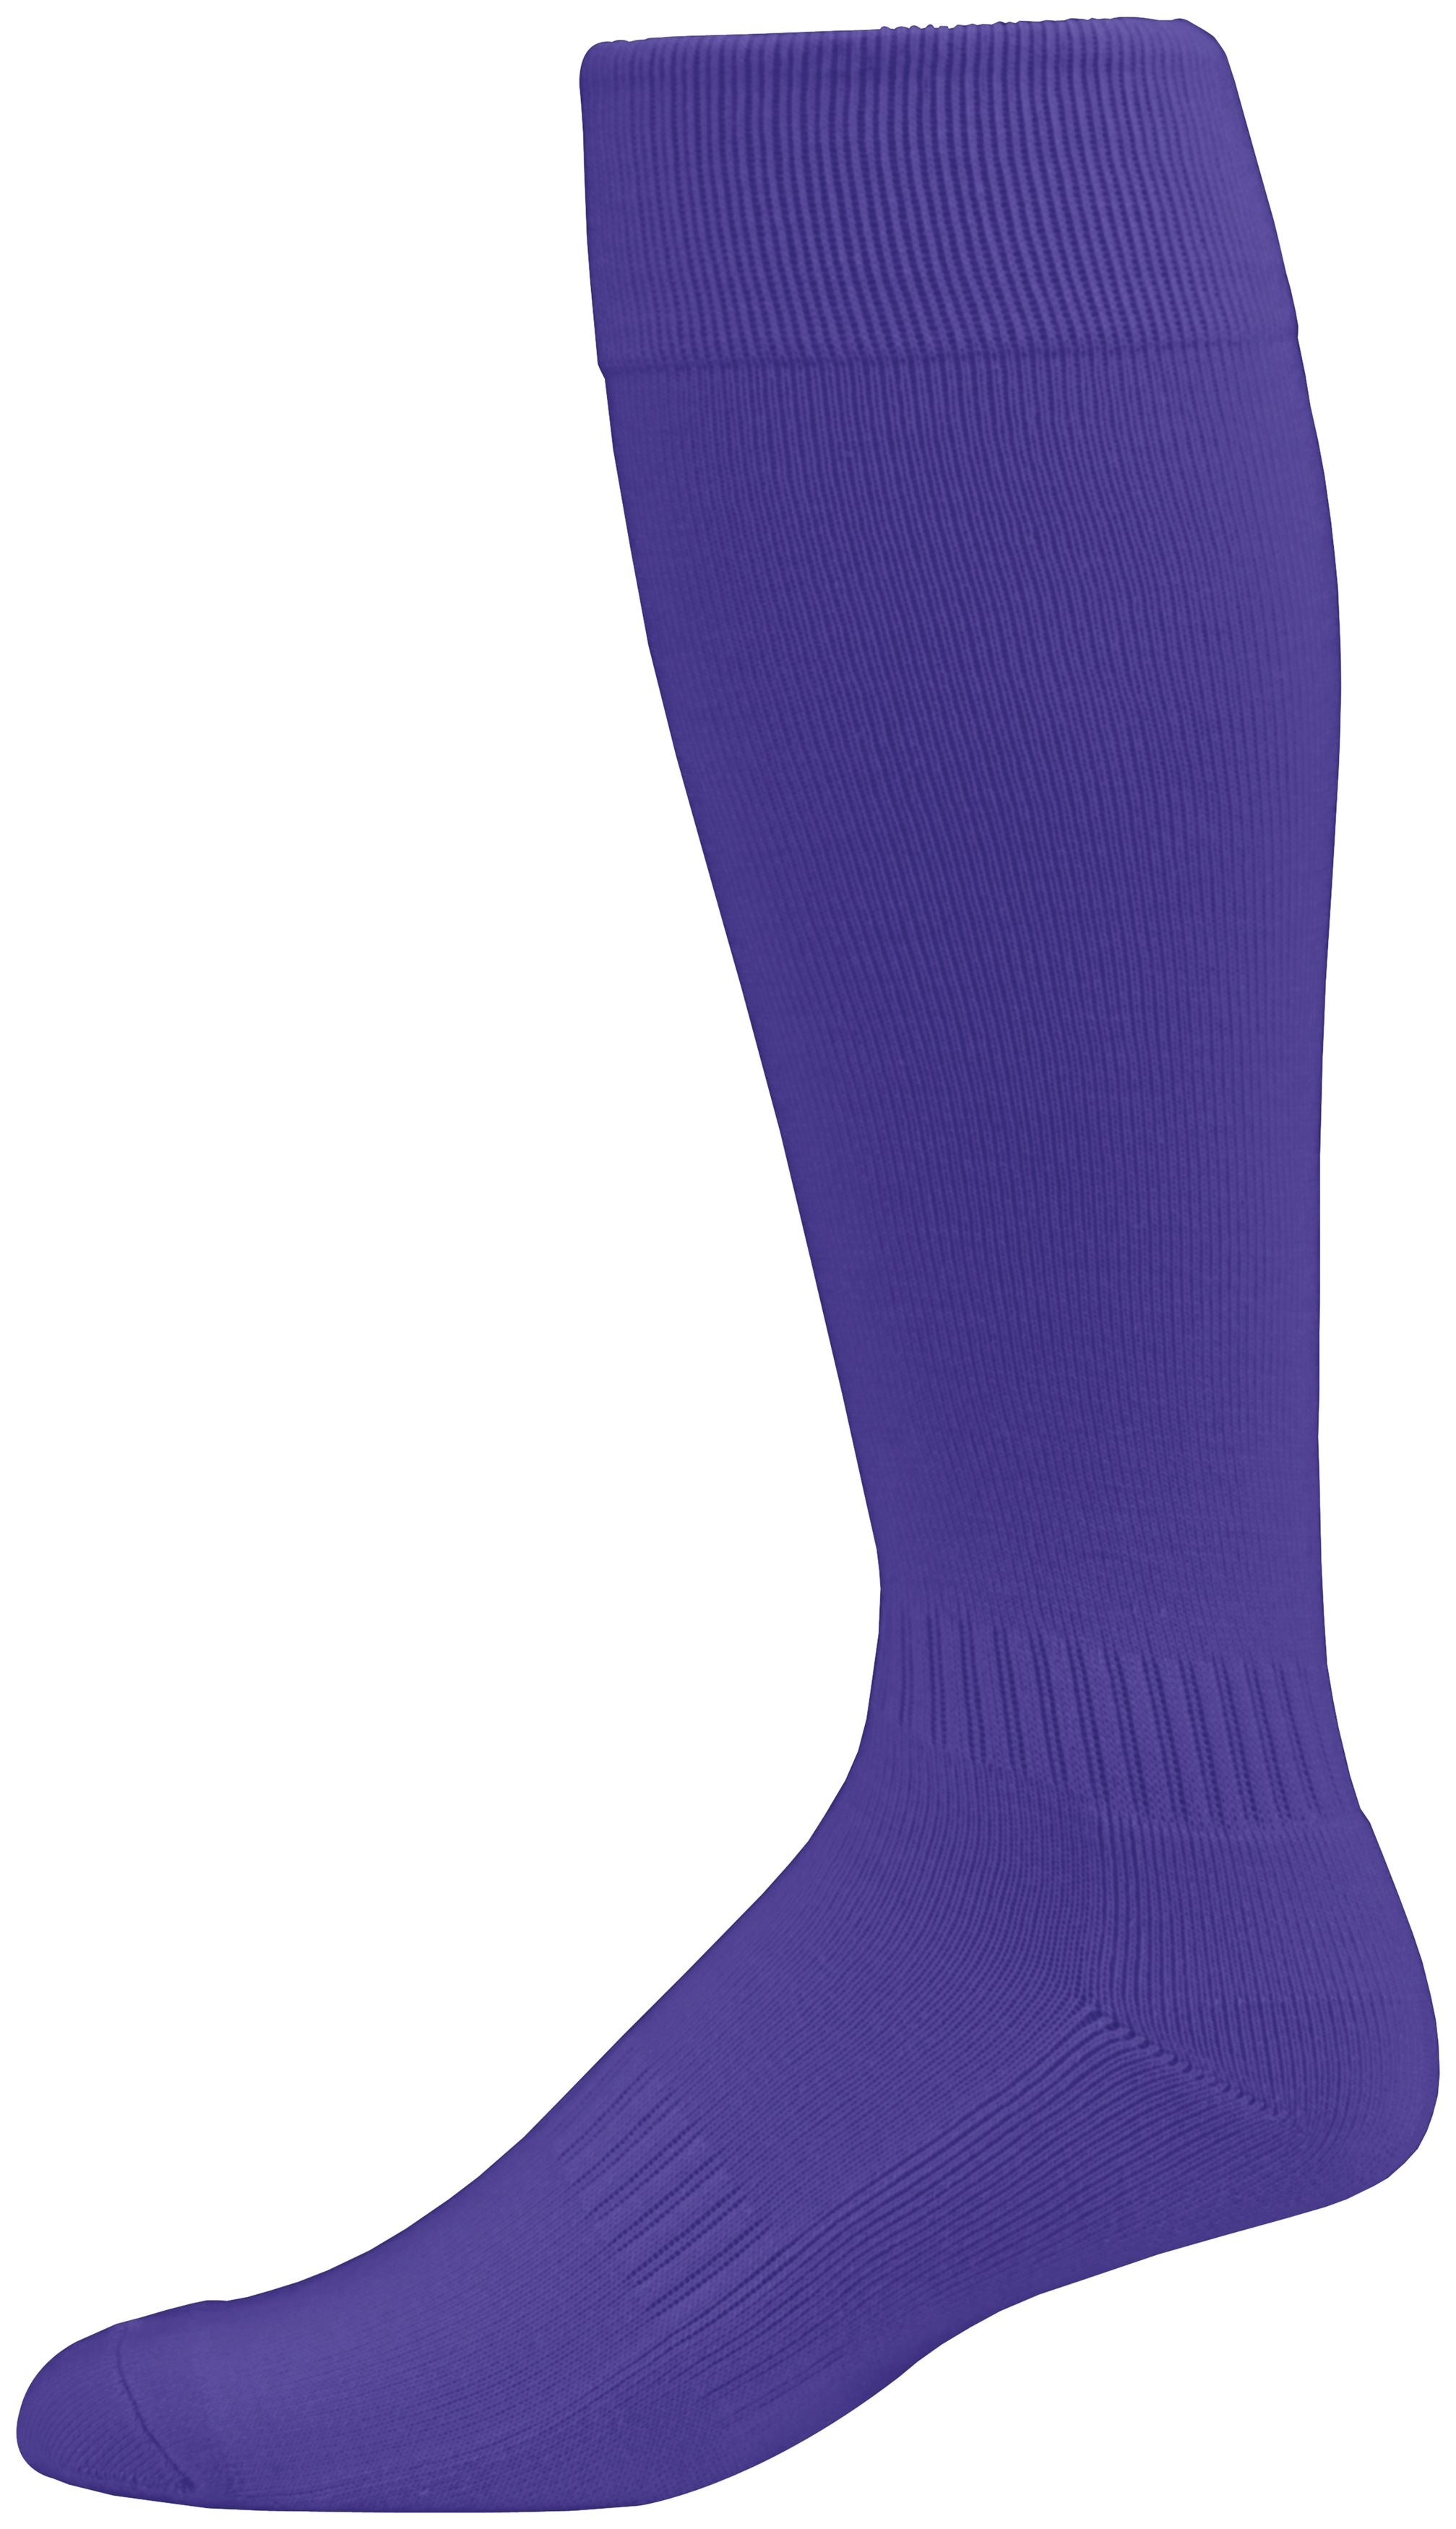 Augusta Sportswear Elite Multi-Sport Sock in Purple (Hlw)  -Part of the Accessories, Augusta-Products, Accessories-Socks product lines at KanaleyCreations.com